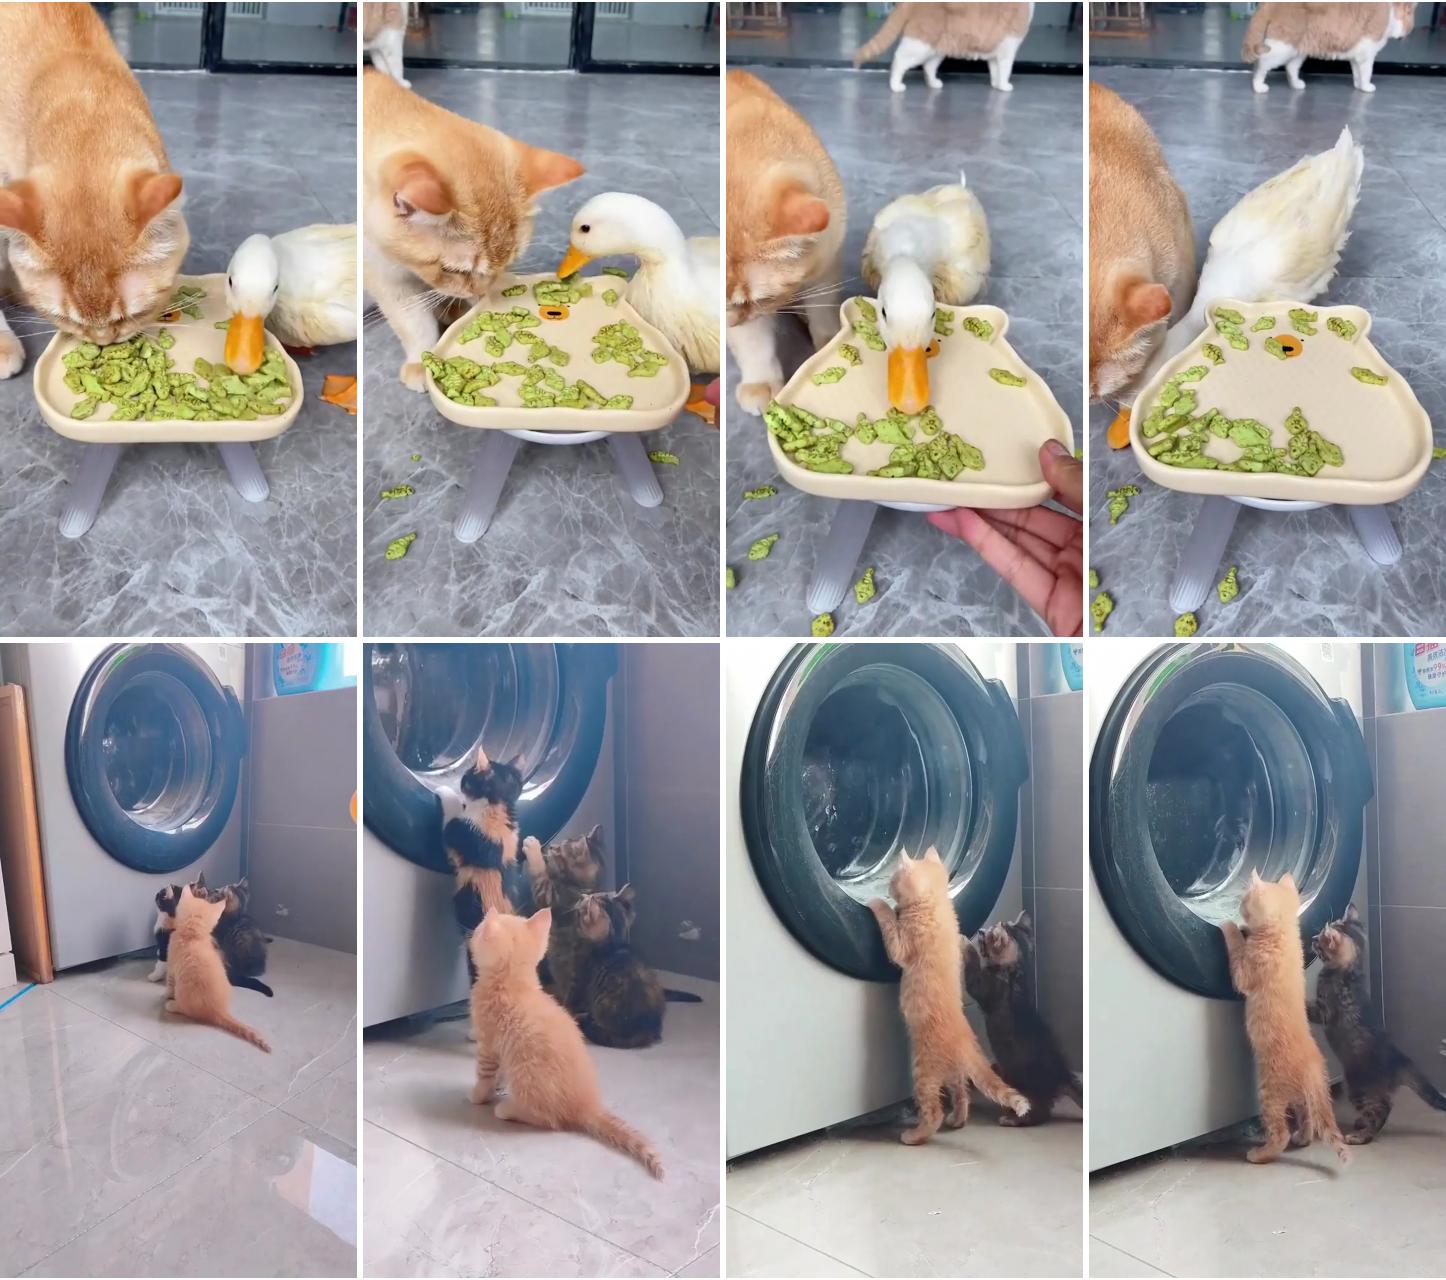 Why do ducks eat cats food #funny #cat #cute #funny #cat #cute #pet#catlovers #pets #animallovers; the funniest cat videos on the internet 